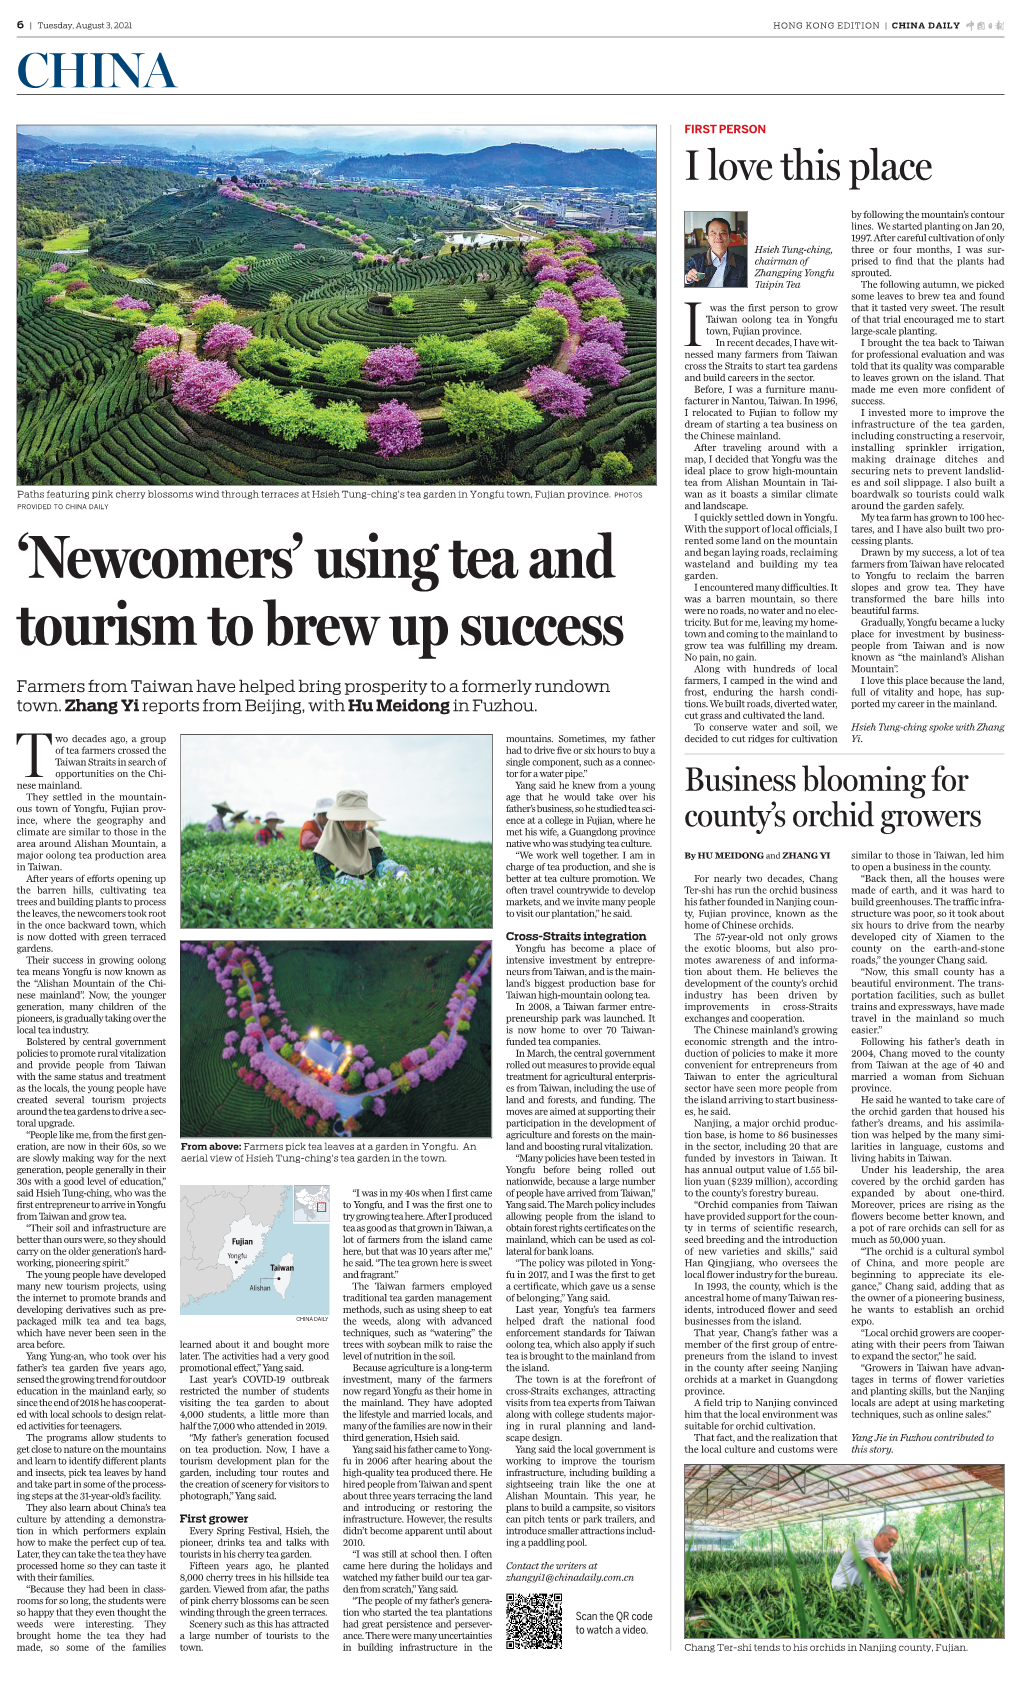 Using Tea and Tourism to Brew up Success